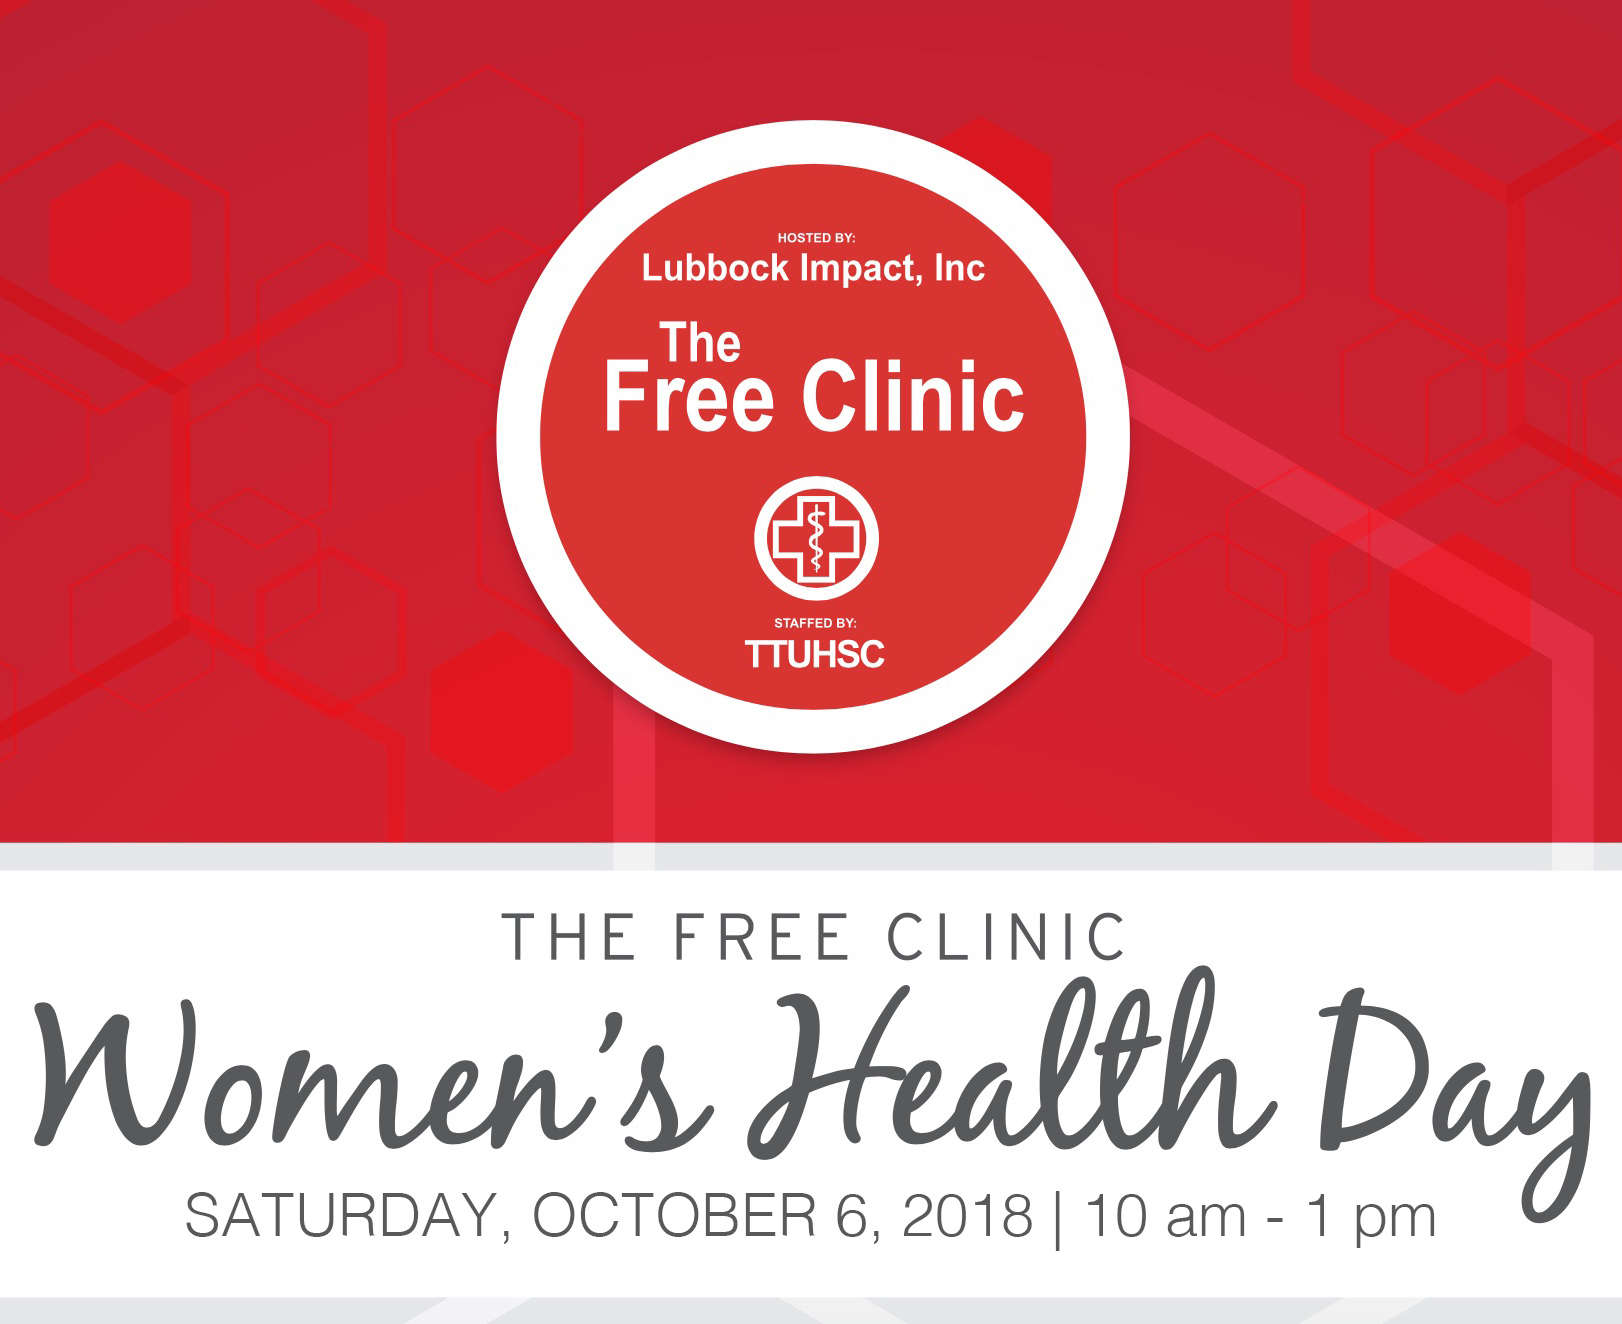 Free Clinic Offered for Women's Health Day